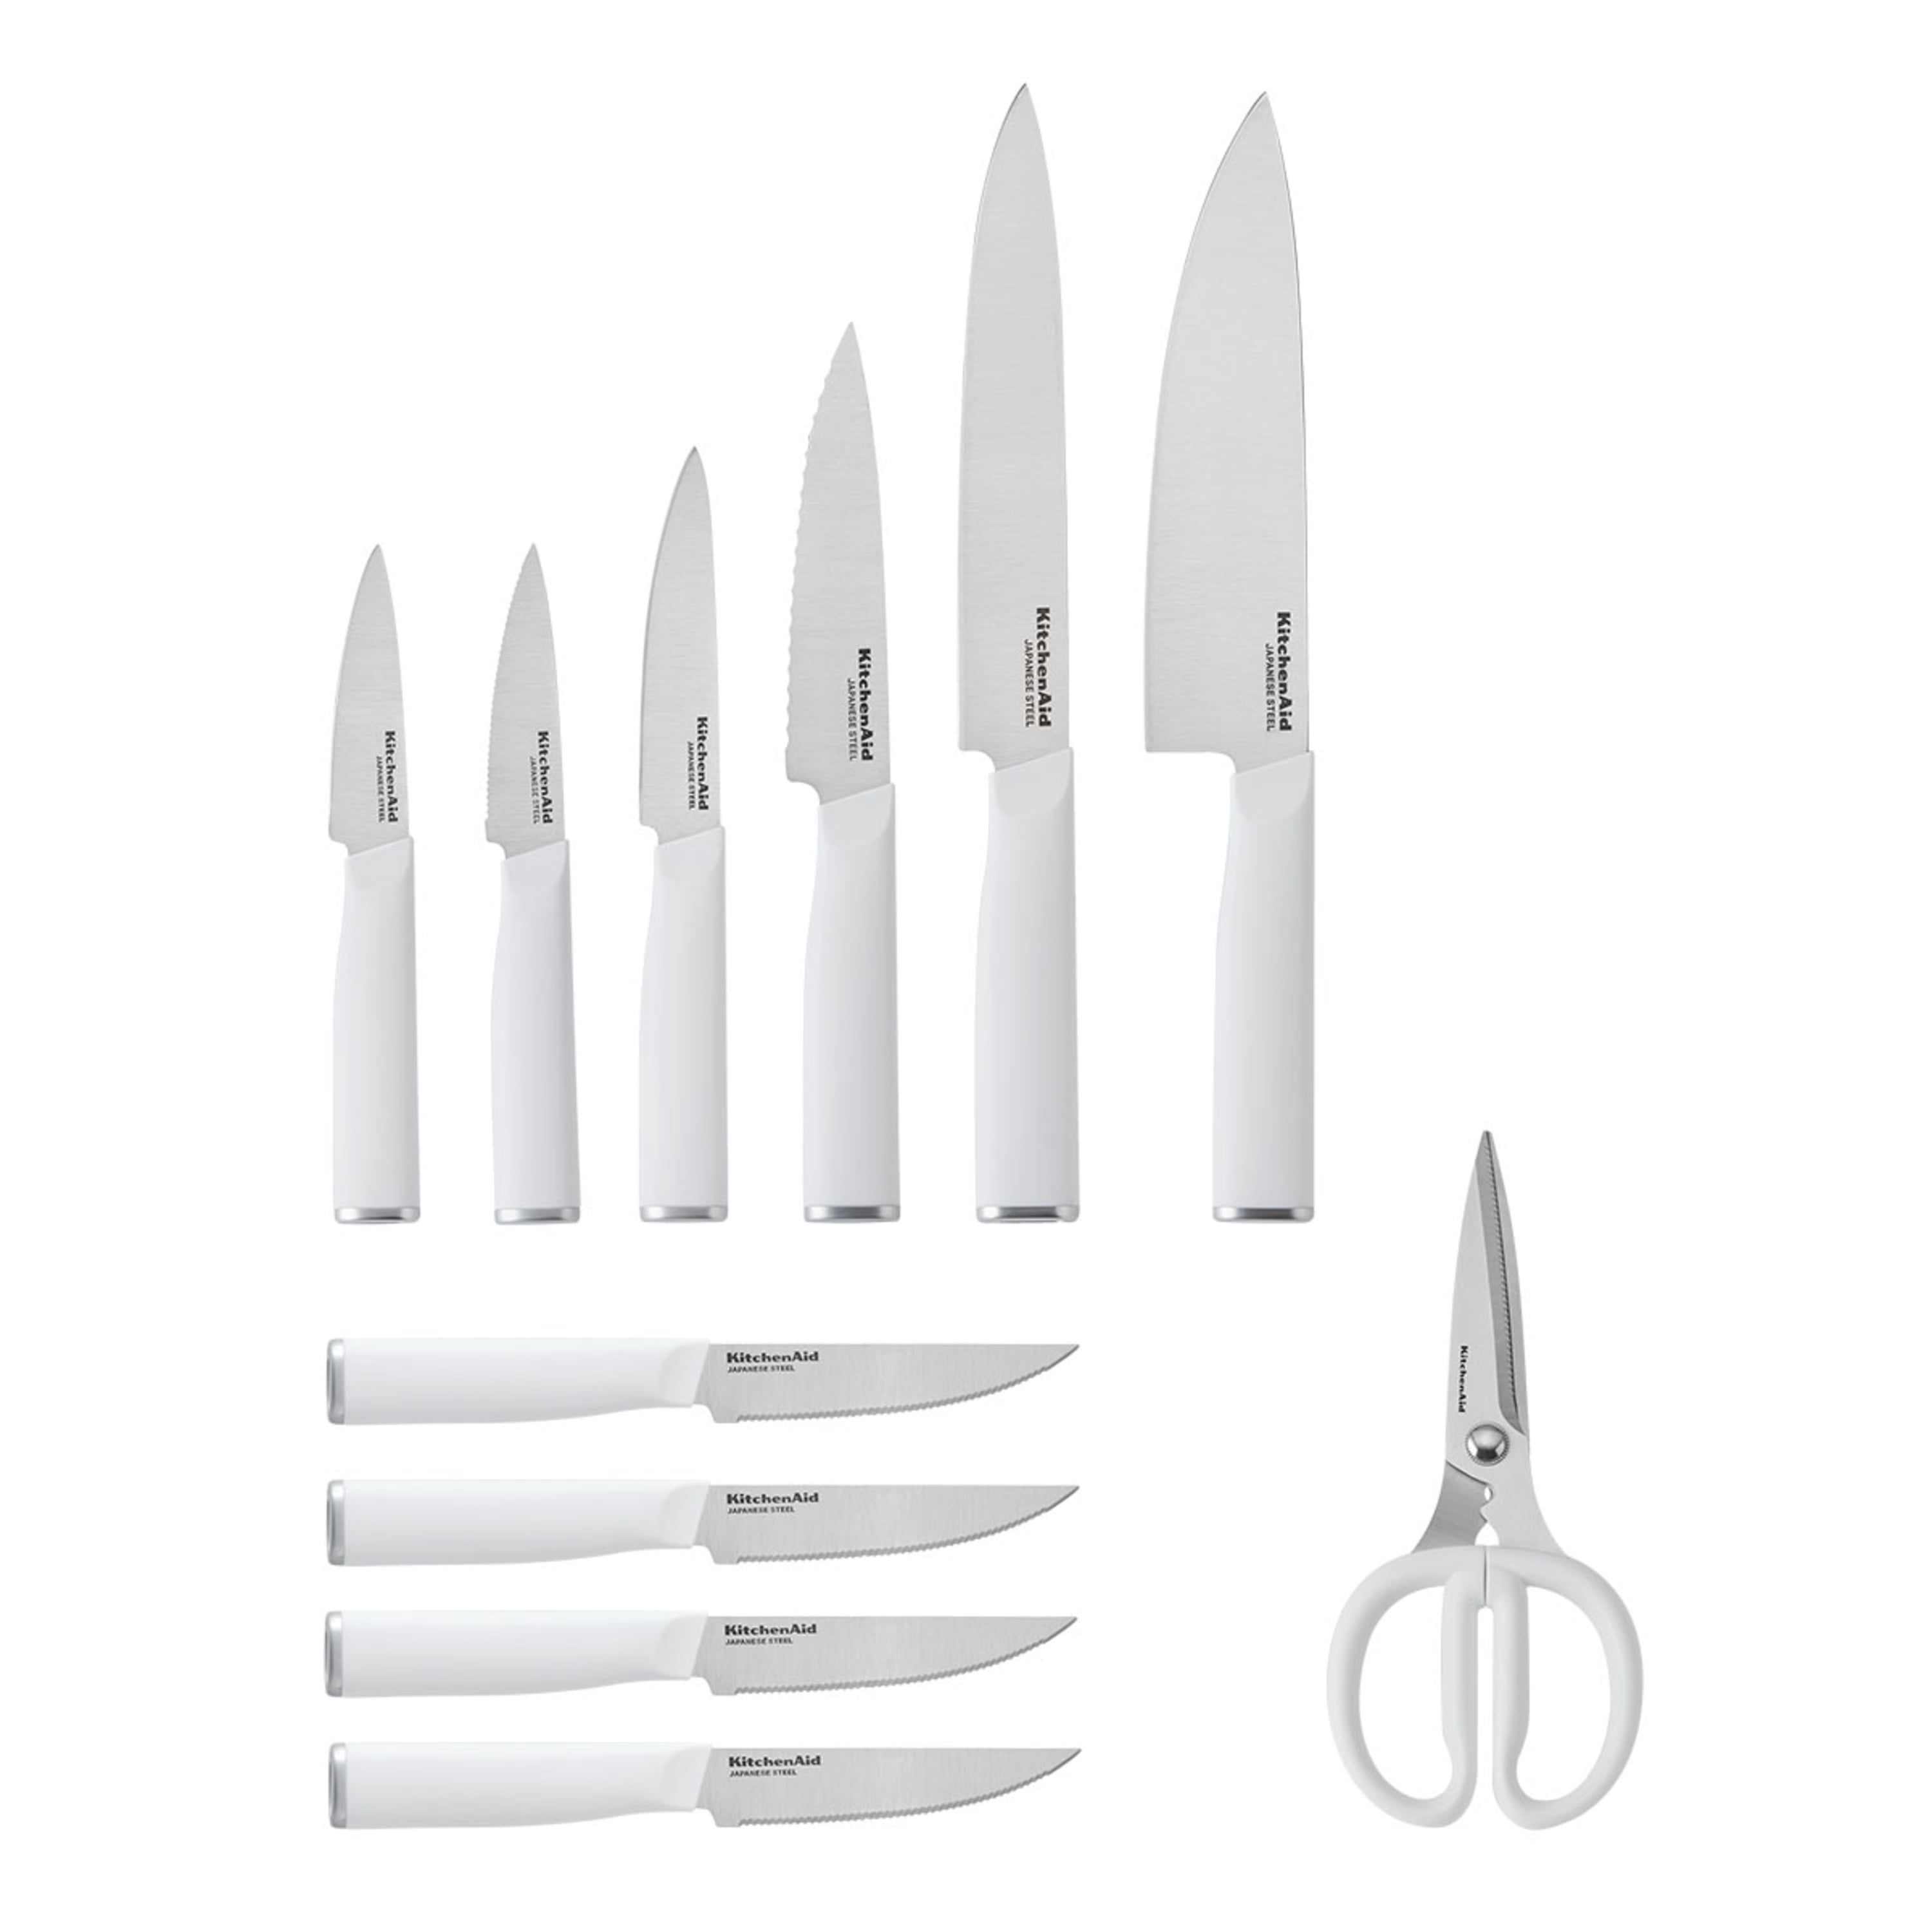 KitchenAid Classic 12-Piece Block Set with Built-in Knife Sharpener,  Natural - Bed Bath & Beyond - 35931953